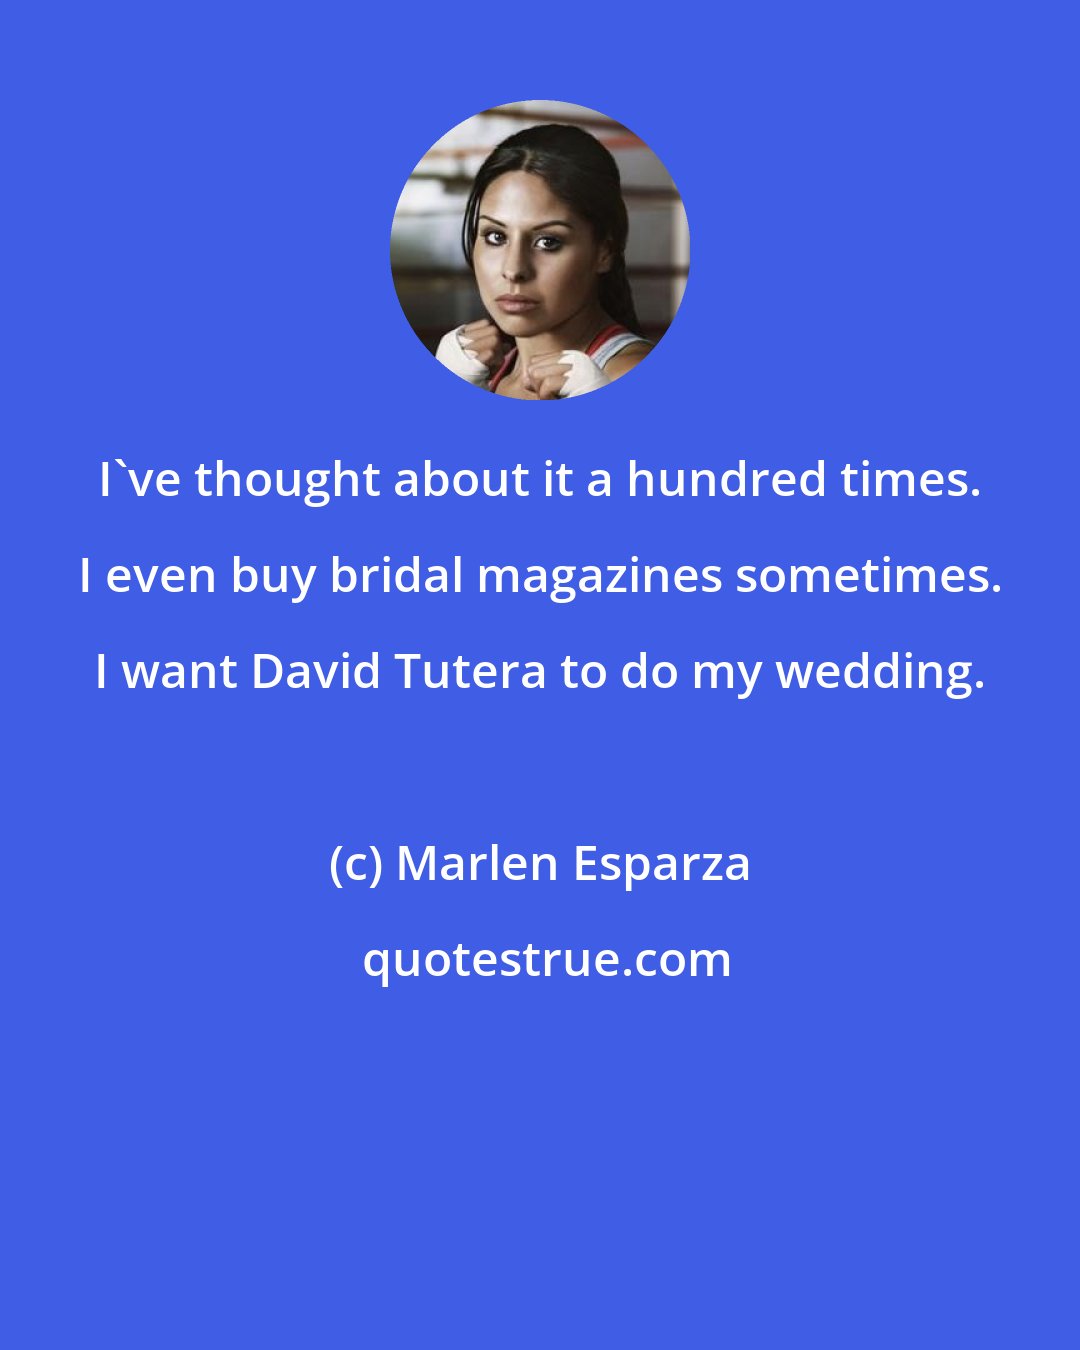 Marlen Esparza: I've thought about it a hundred times. I even buy bridal magazines sometimes. I want David Tutera to do my wedding.